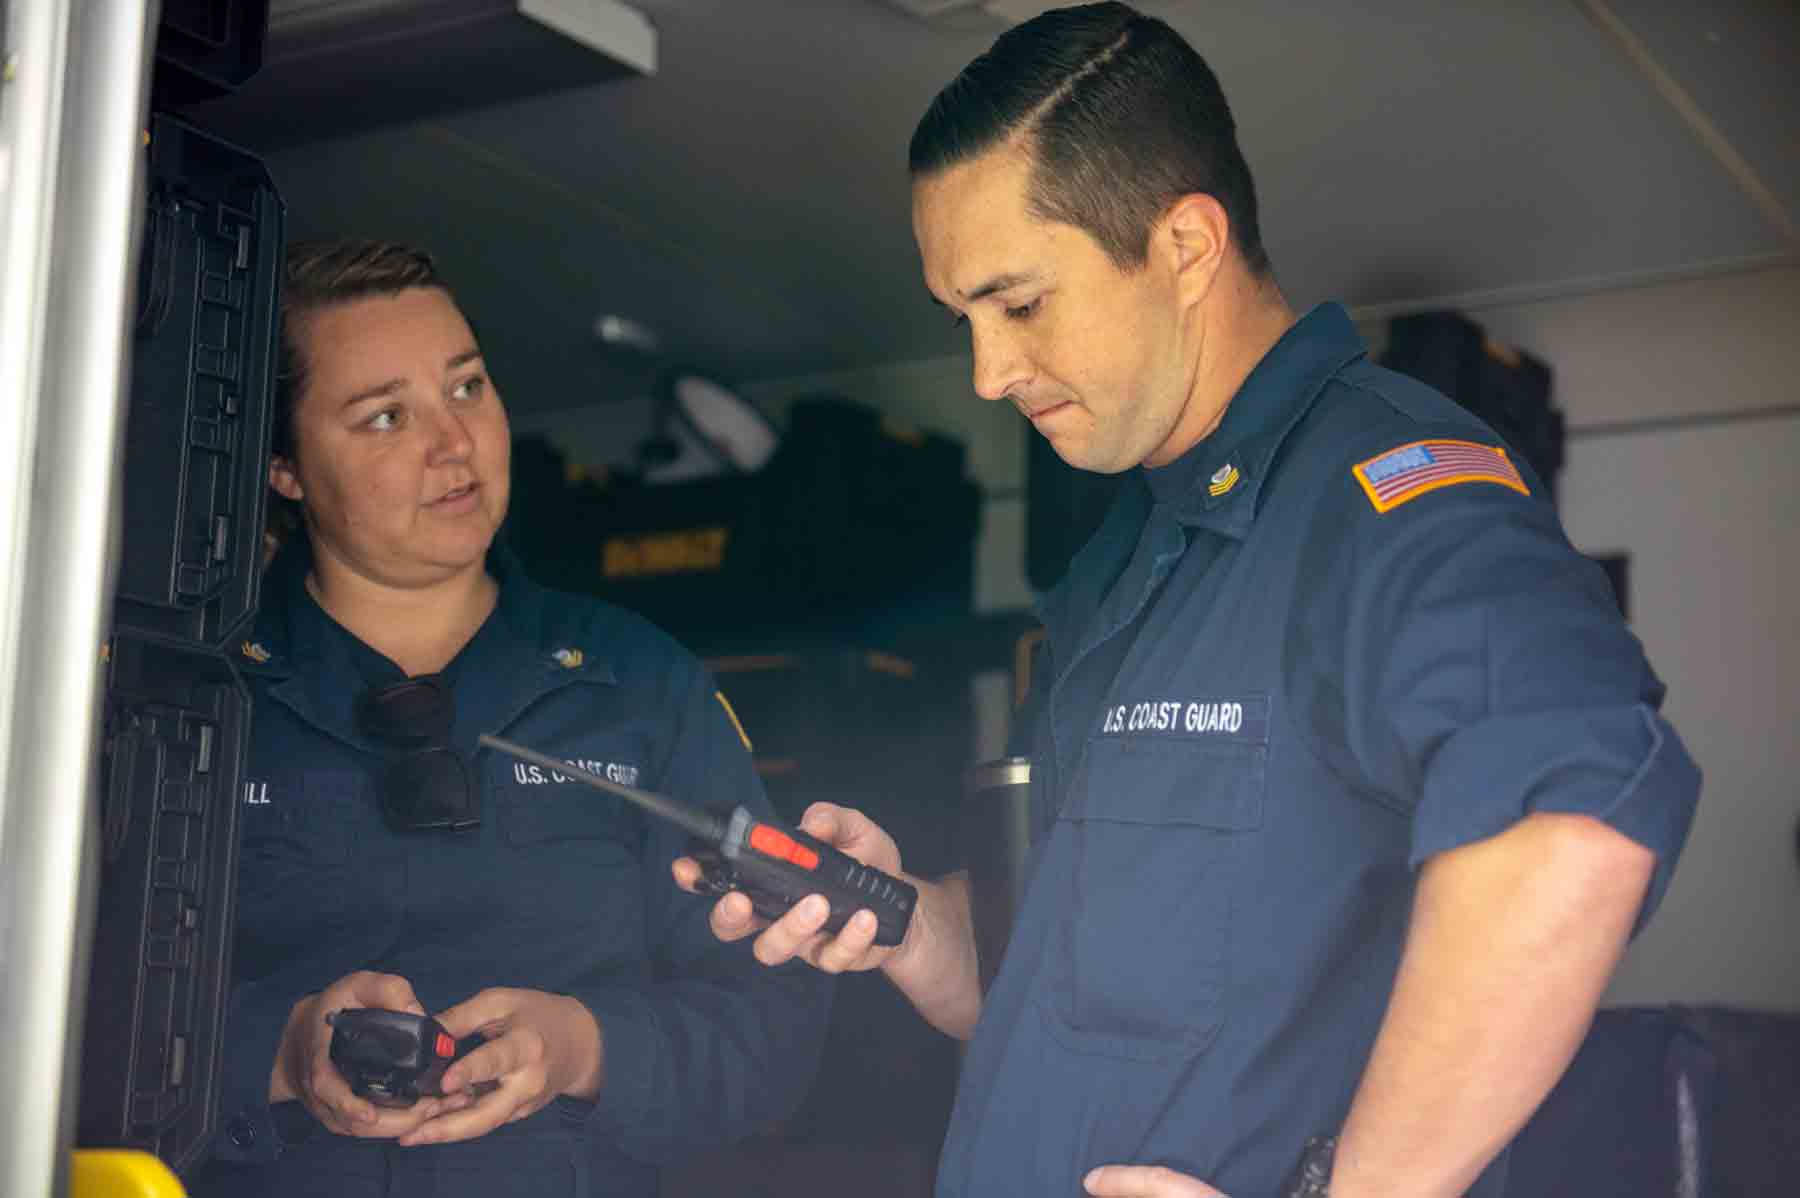 Two Coast Guard members assigned to the Gulf, Atlantic, and Pacific Strike teams test hand-held radios.